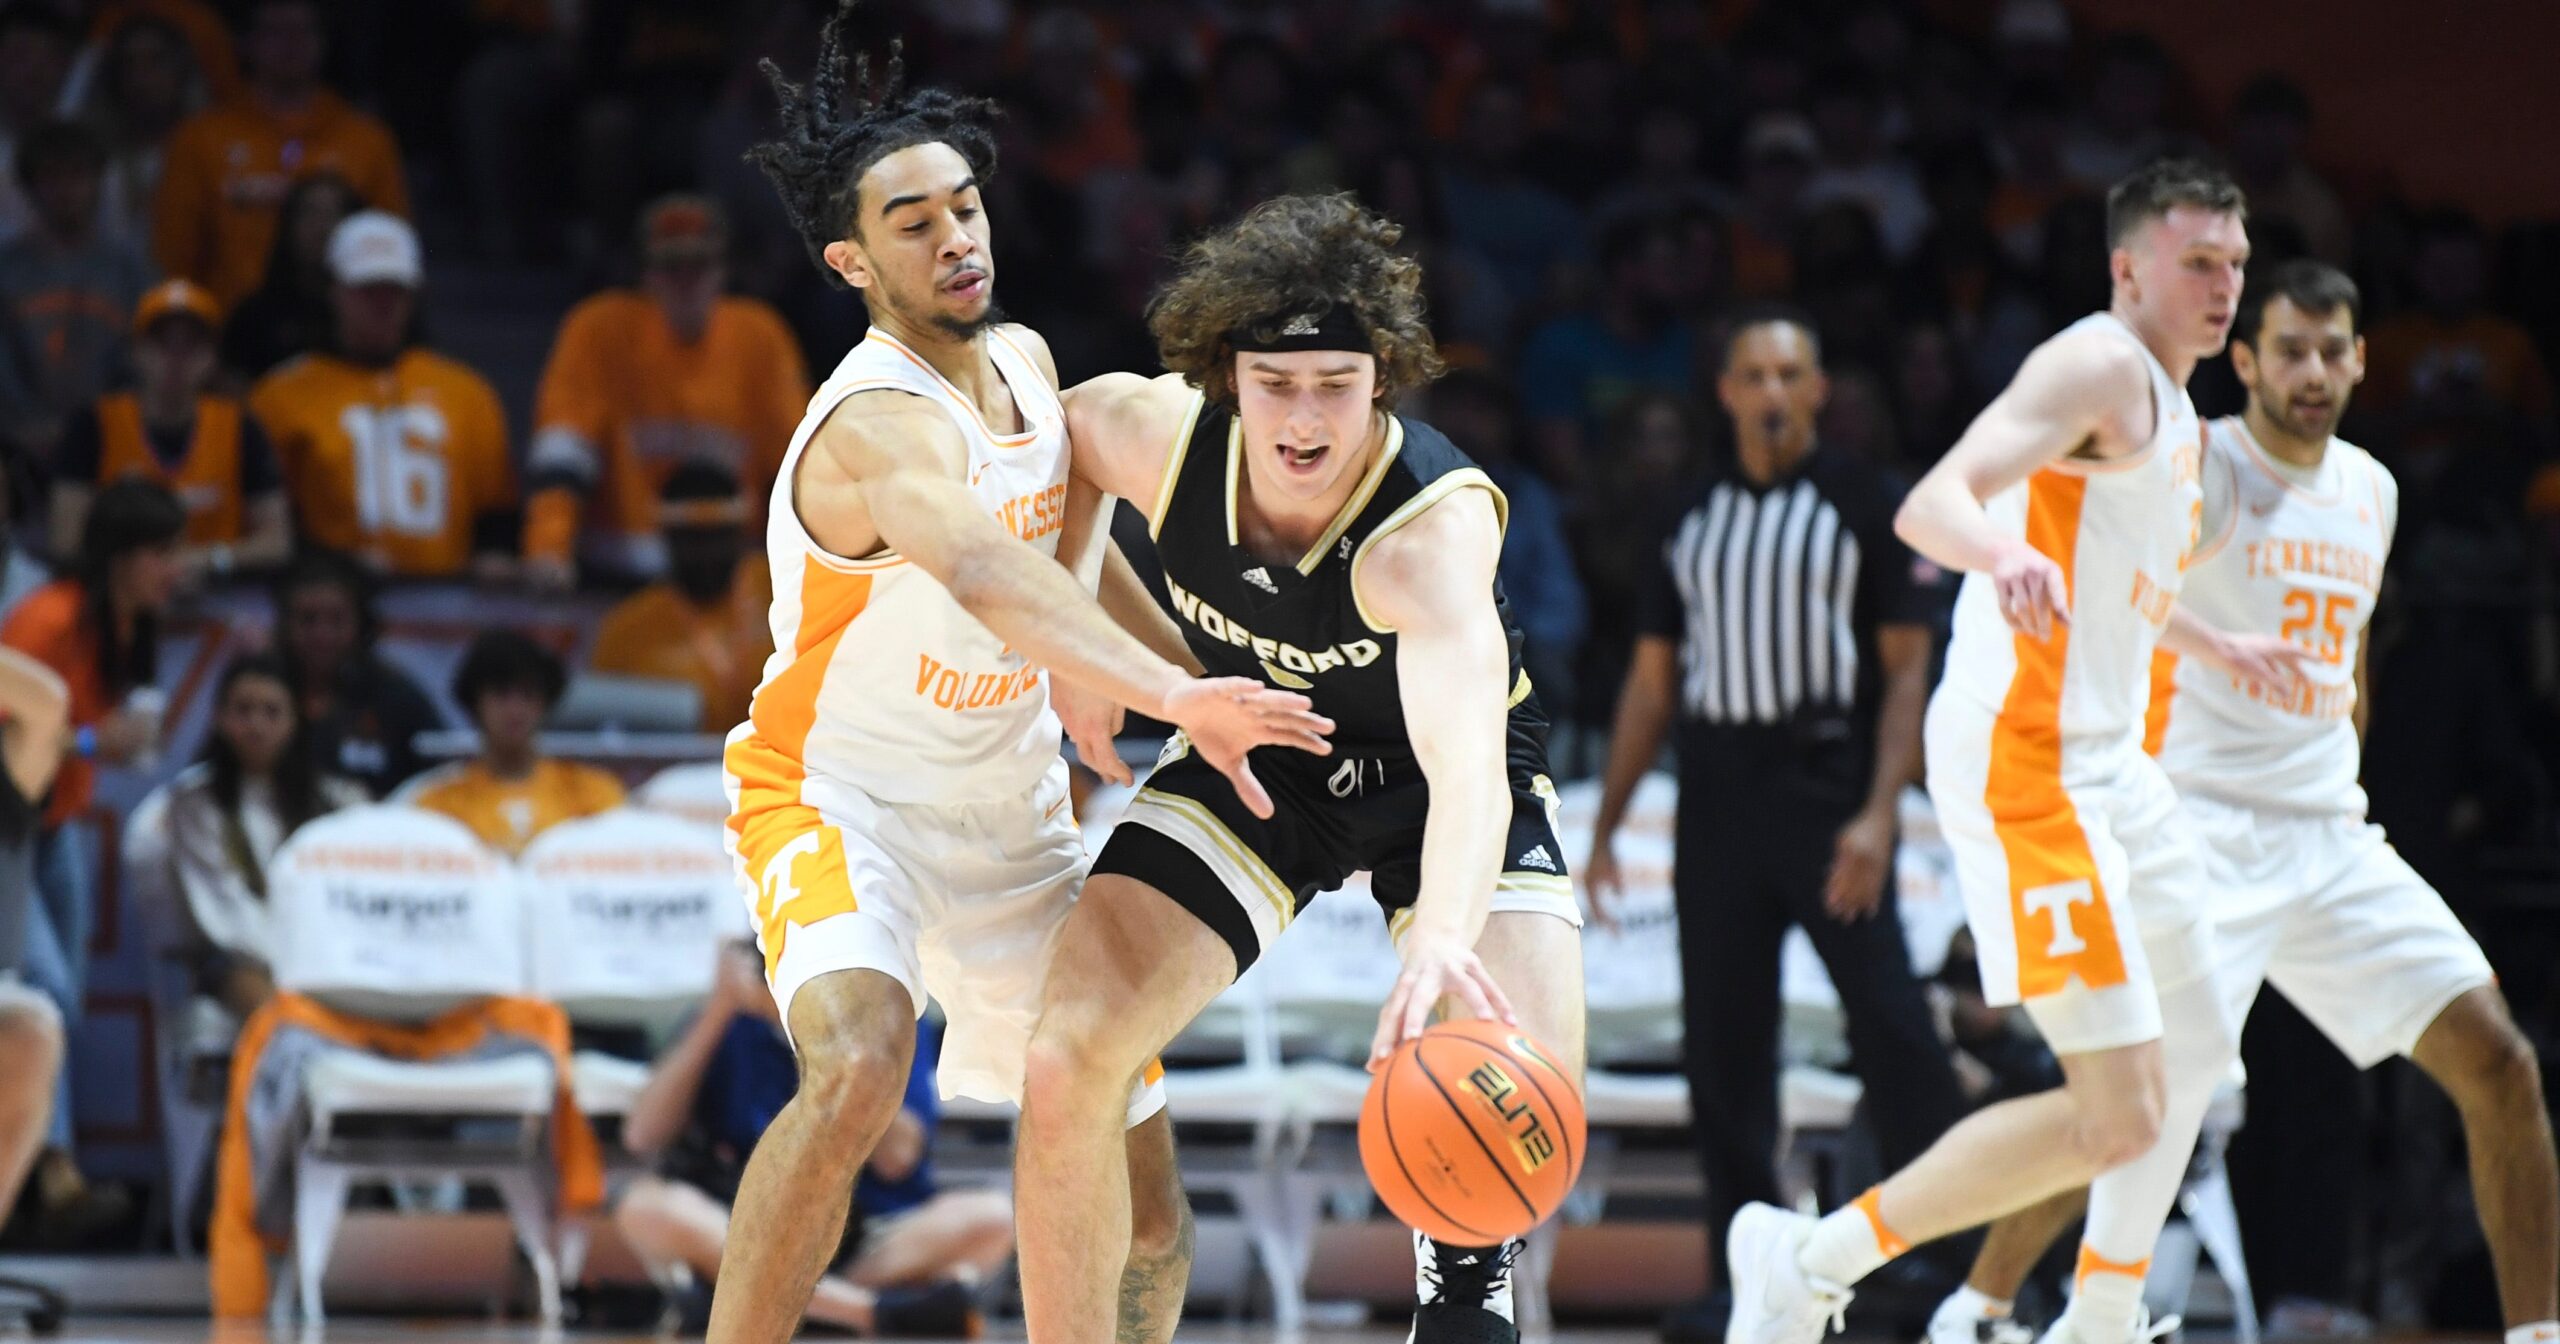 Freddie Dilione out for Tennessee at Maui Invitational